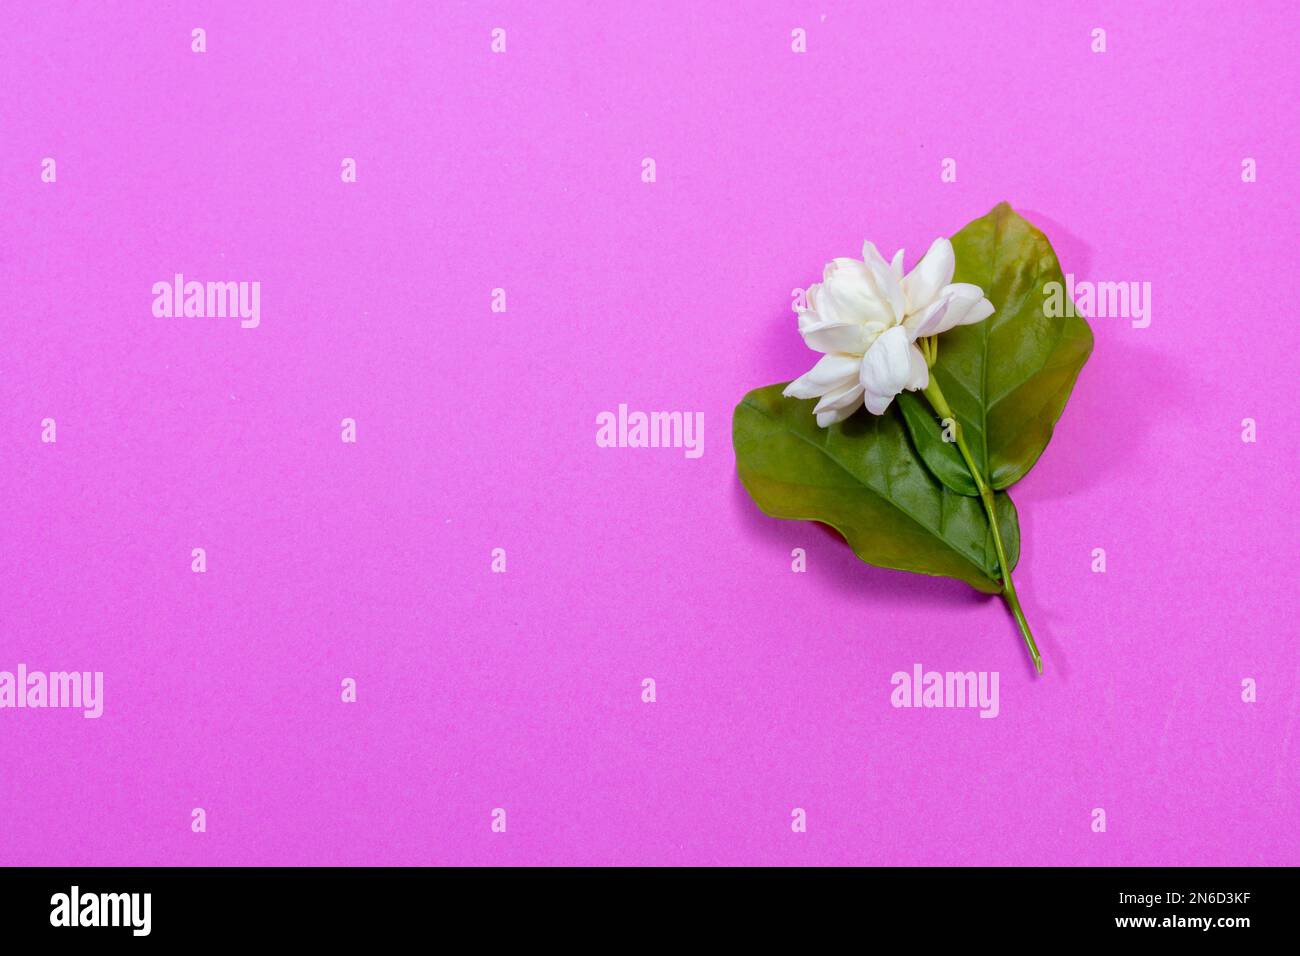 Jasmine flower isolated on a pink background for valentines day. Stock Photo